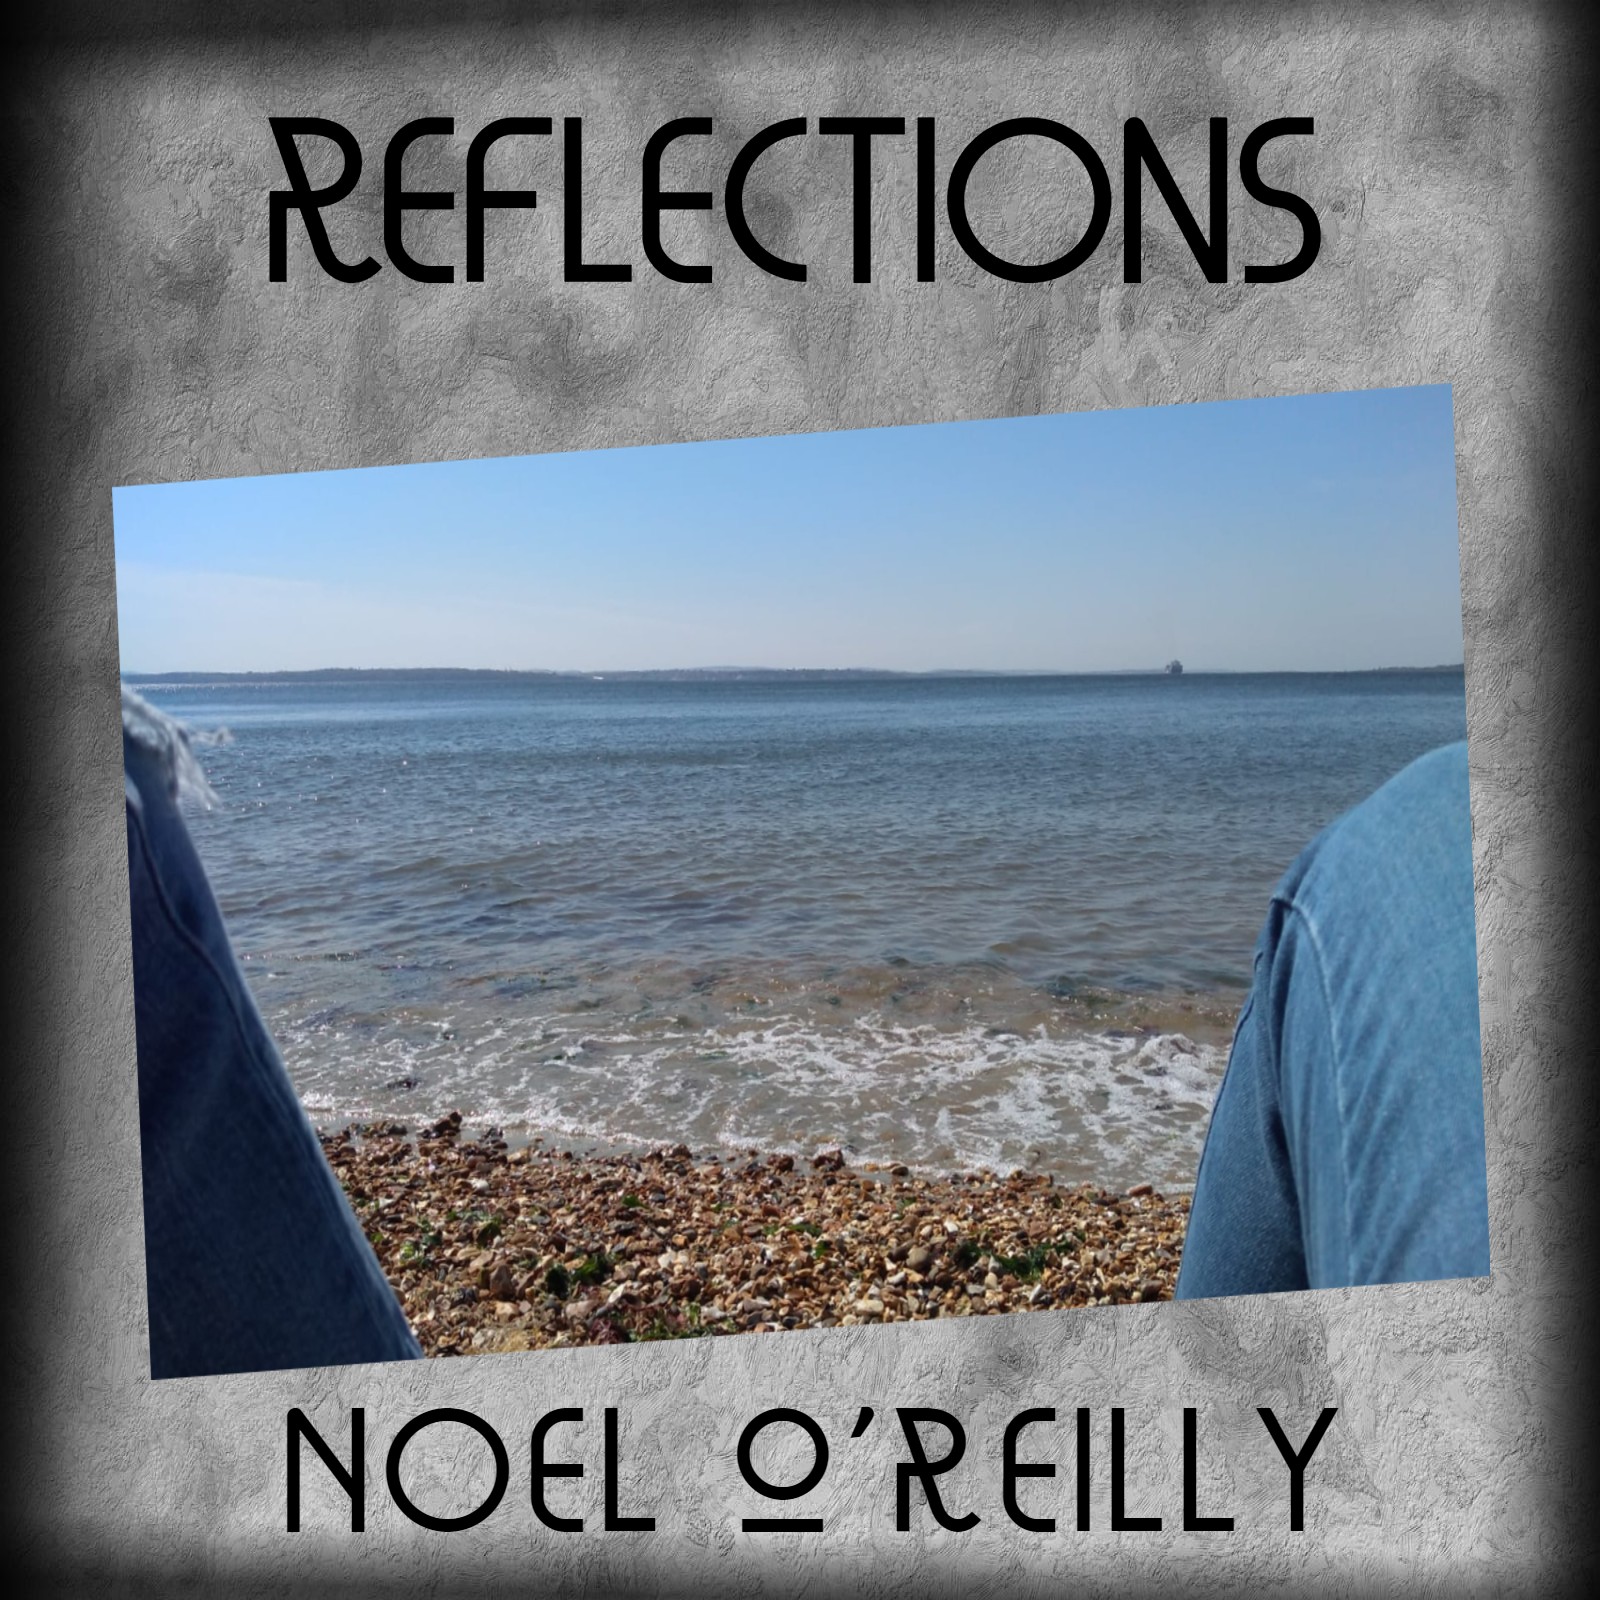 Reflections by the sea